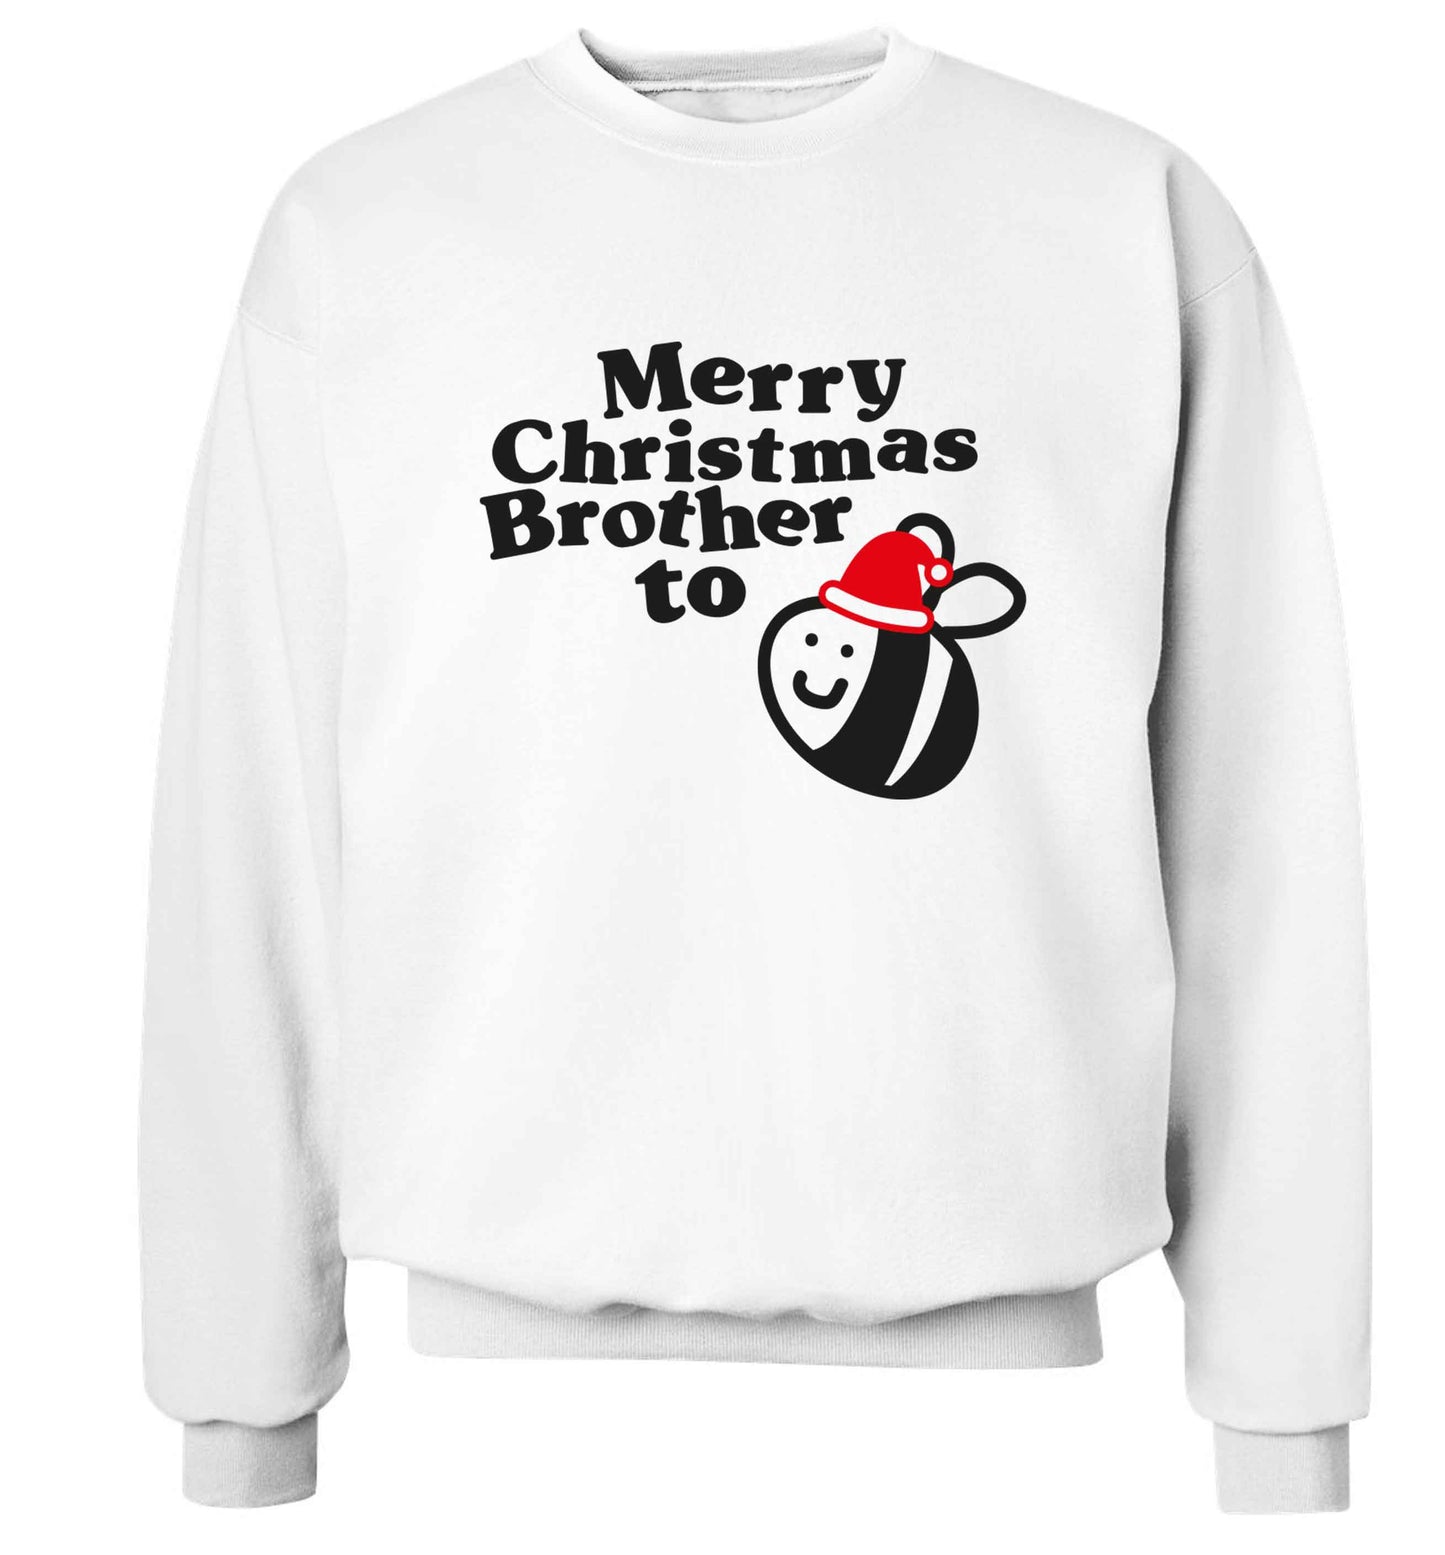 Merry Christmas brother to be Adult's unisex white Sweater 2XL